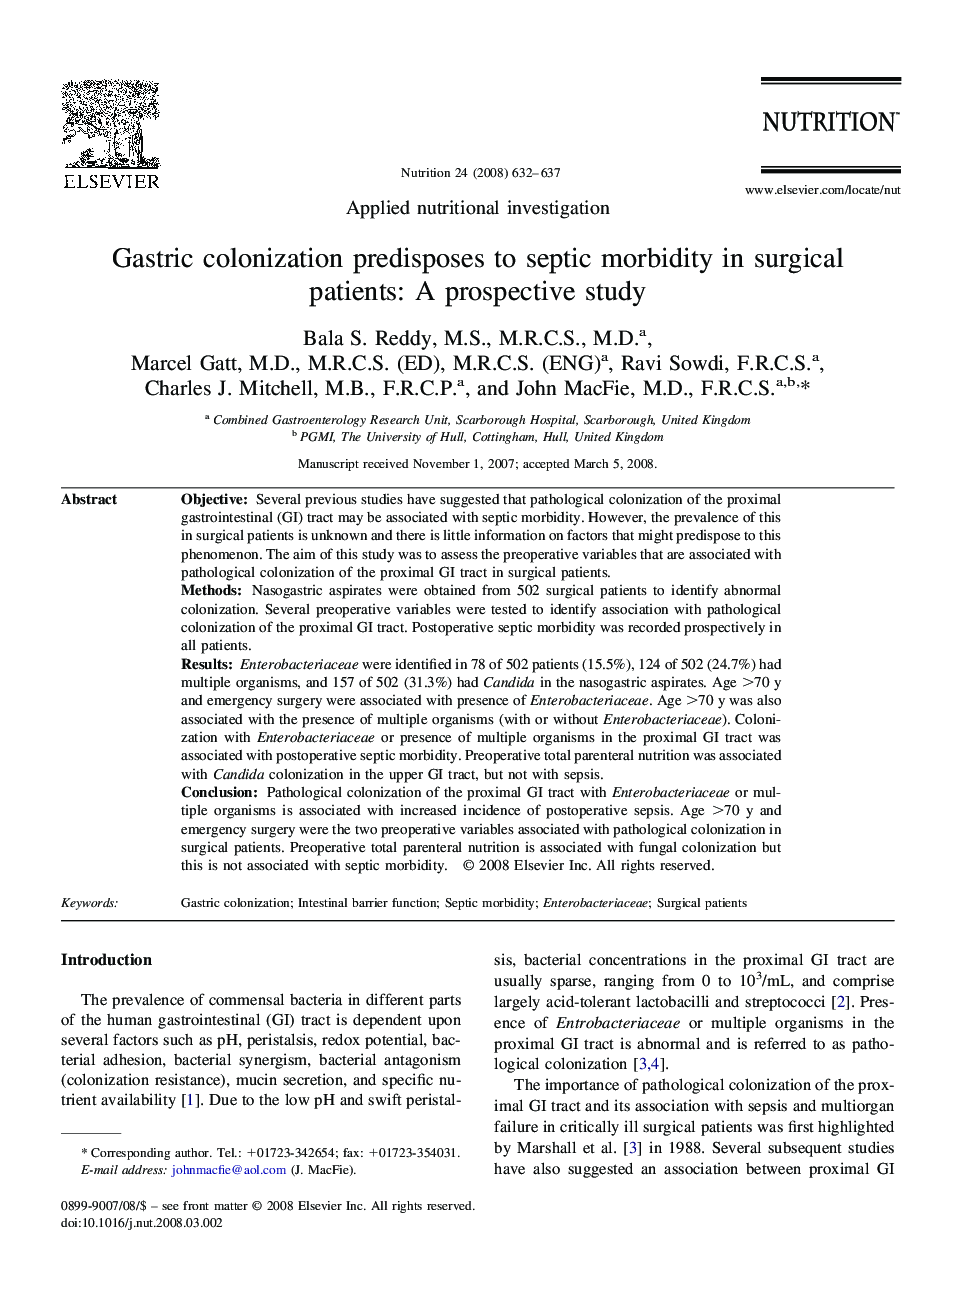 Gastric colonization predisposes to septic morbidity in surgical patients: A prospective study